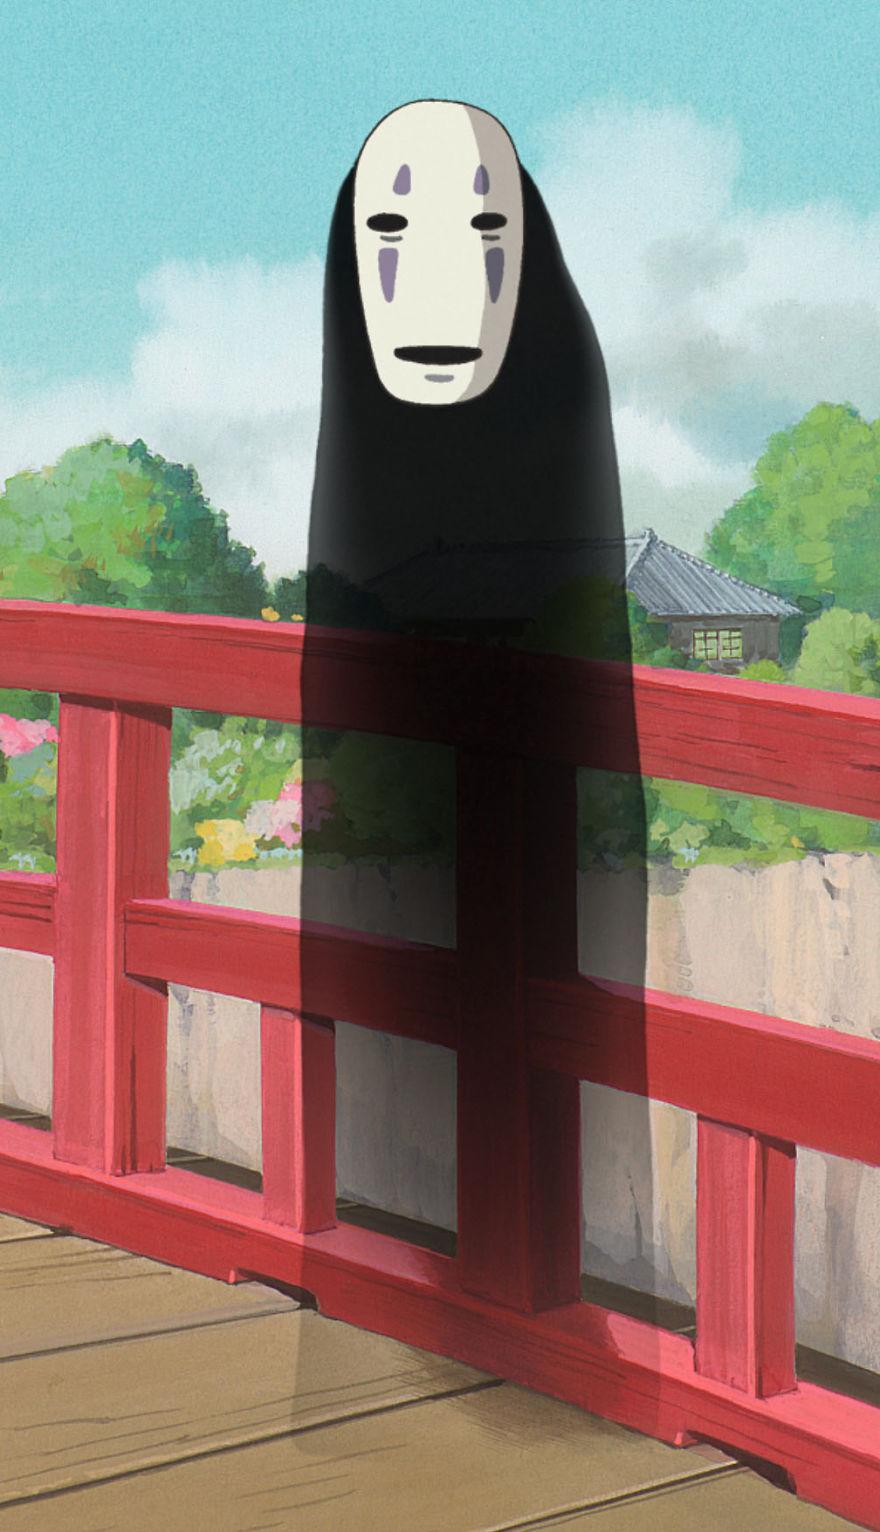 Celebrate The 31st BirtHDay Of Studio Ghibli With These